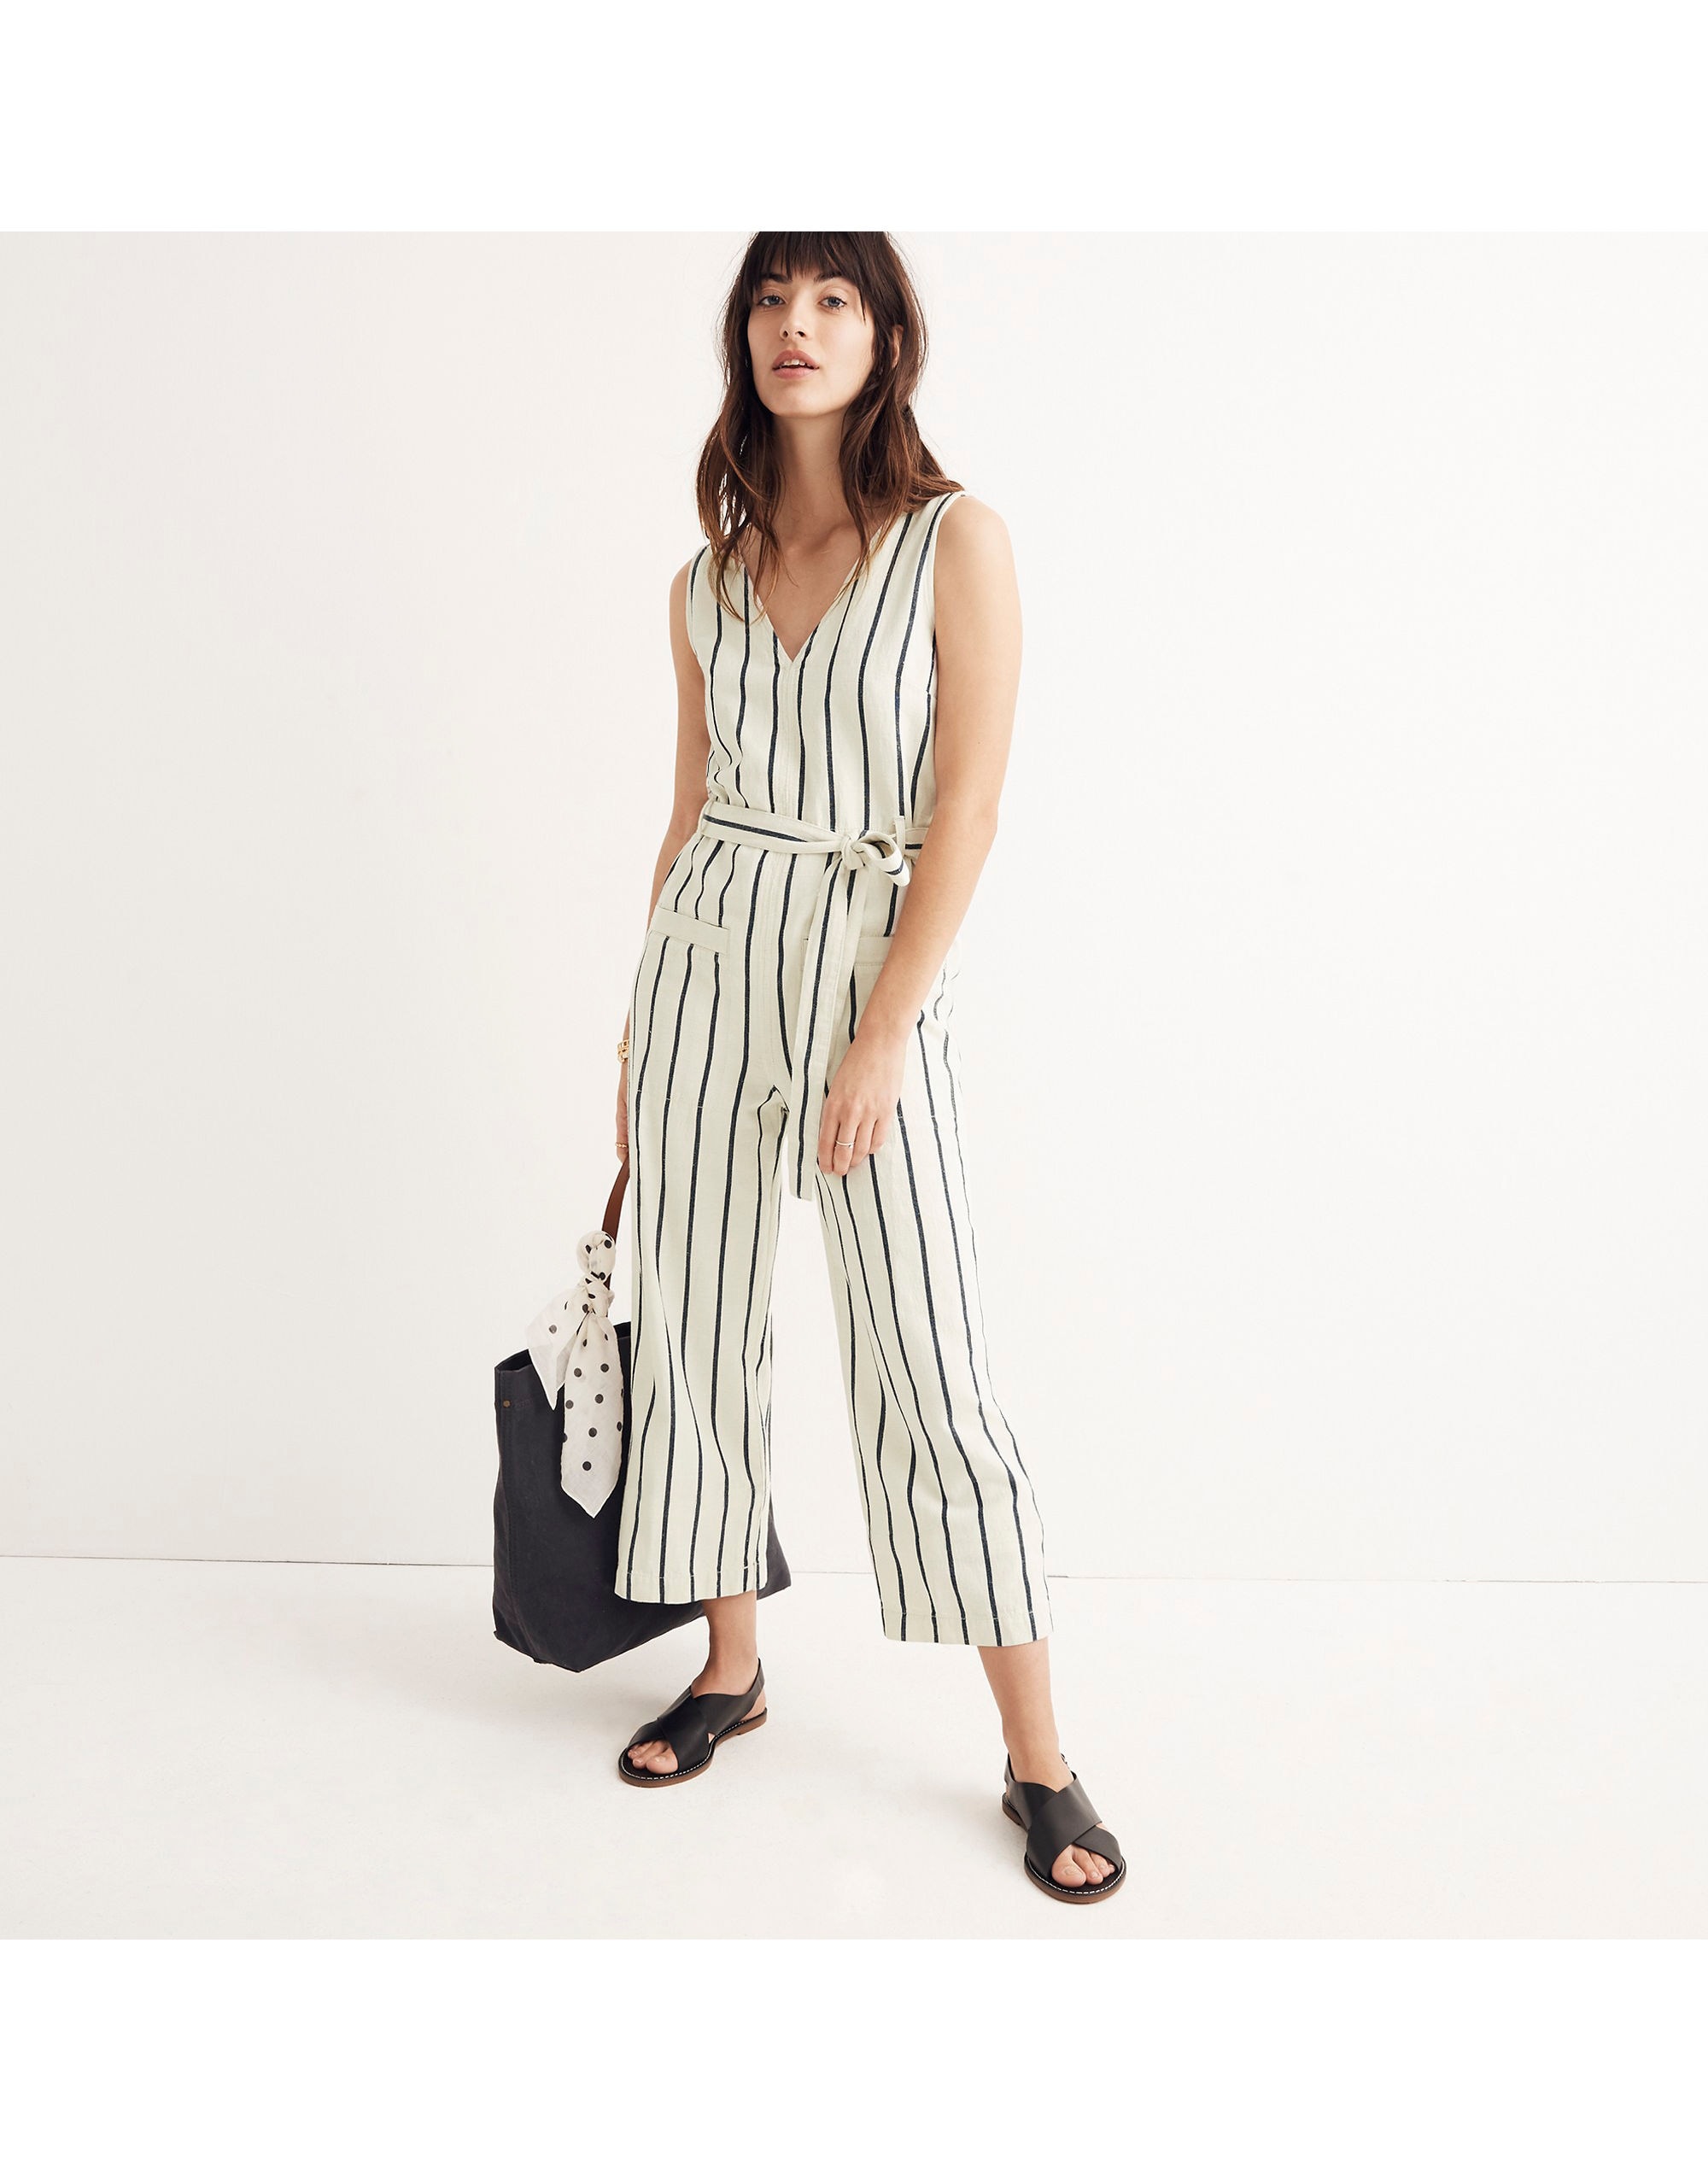 Flattering striped jumpsuit for petites  Jumpsuits for women, Summer  outfits, Jumpsuit dressy